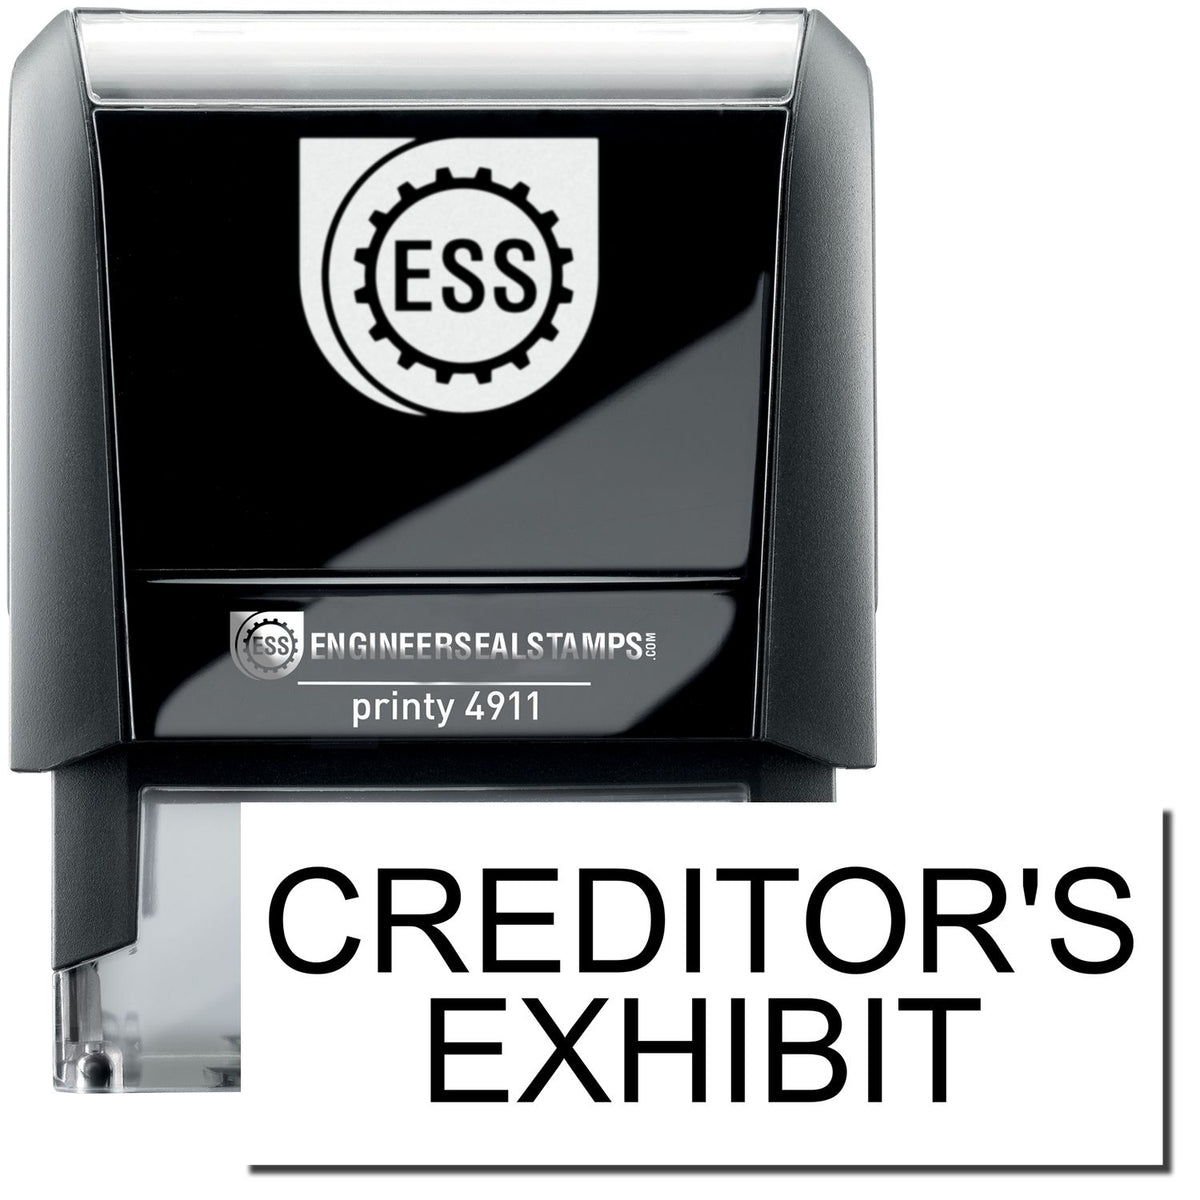 A self-inking stamp with a stamped image showing how the text &quot;CREDITOR&#39;S EXHIBIT&quot; is displayed after stamping.